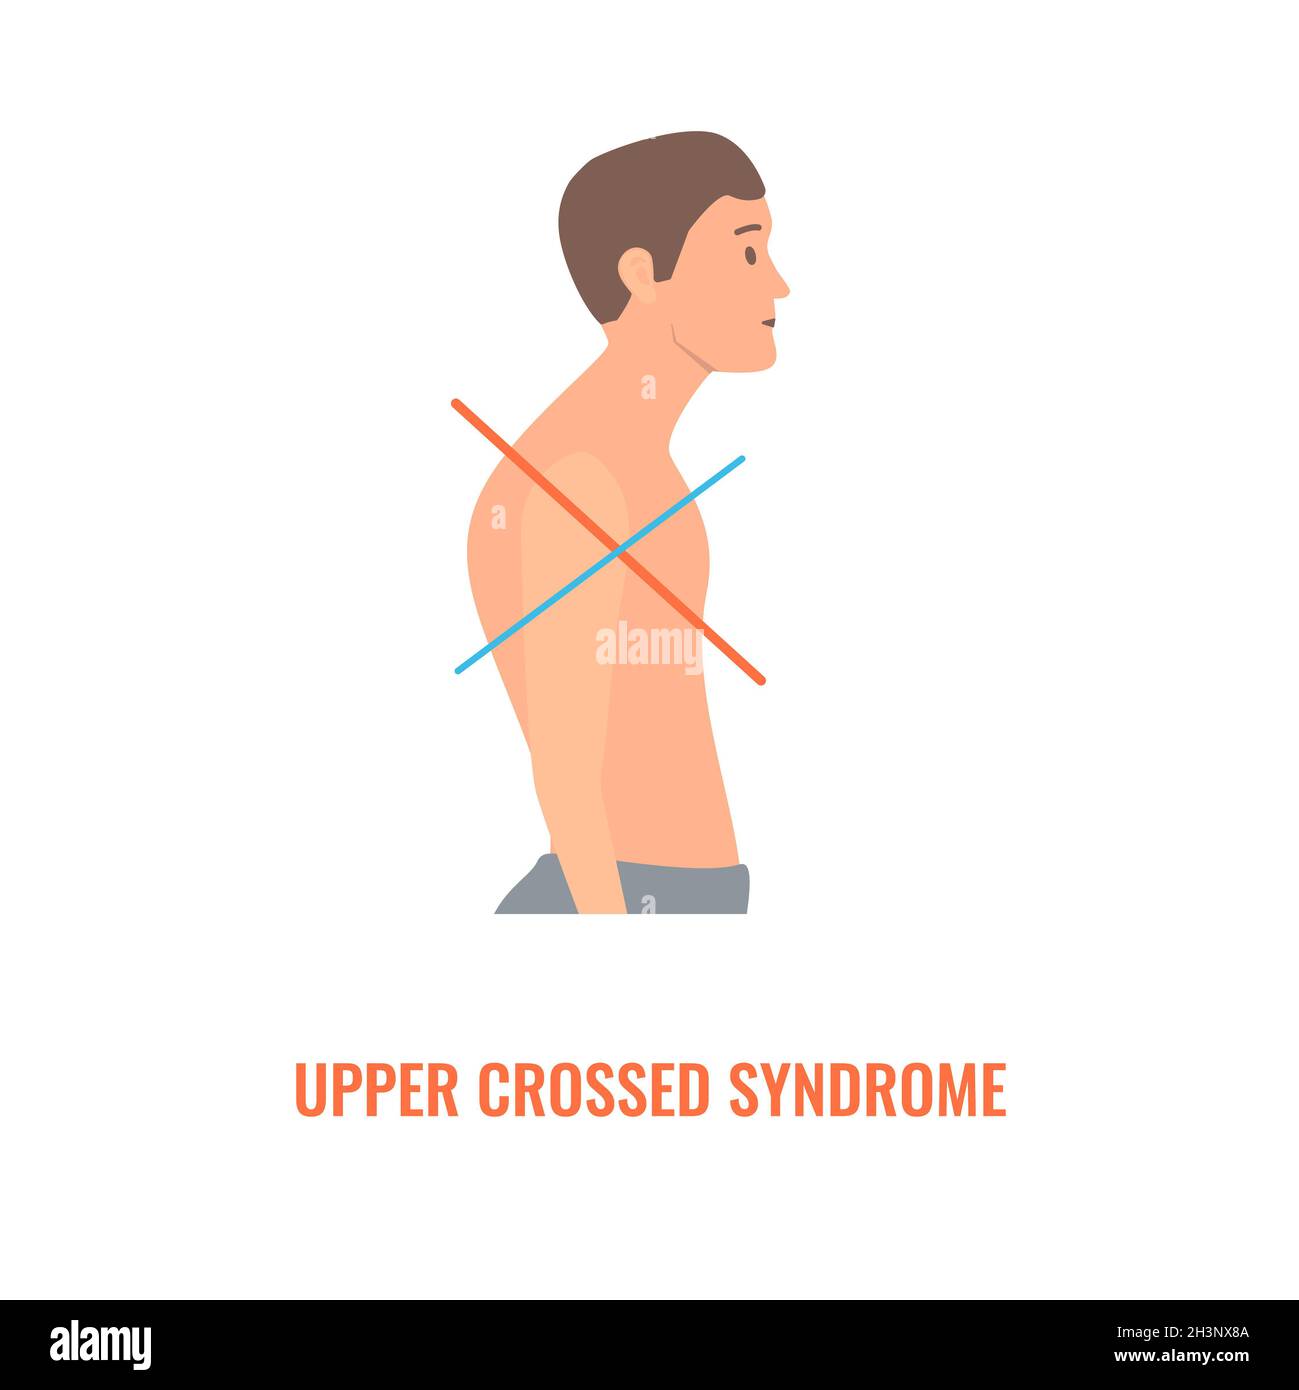 Upper crossed syndrome, conceptual illustration Stock Photo